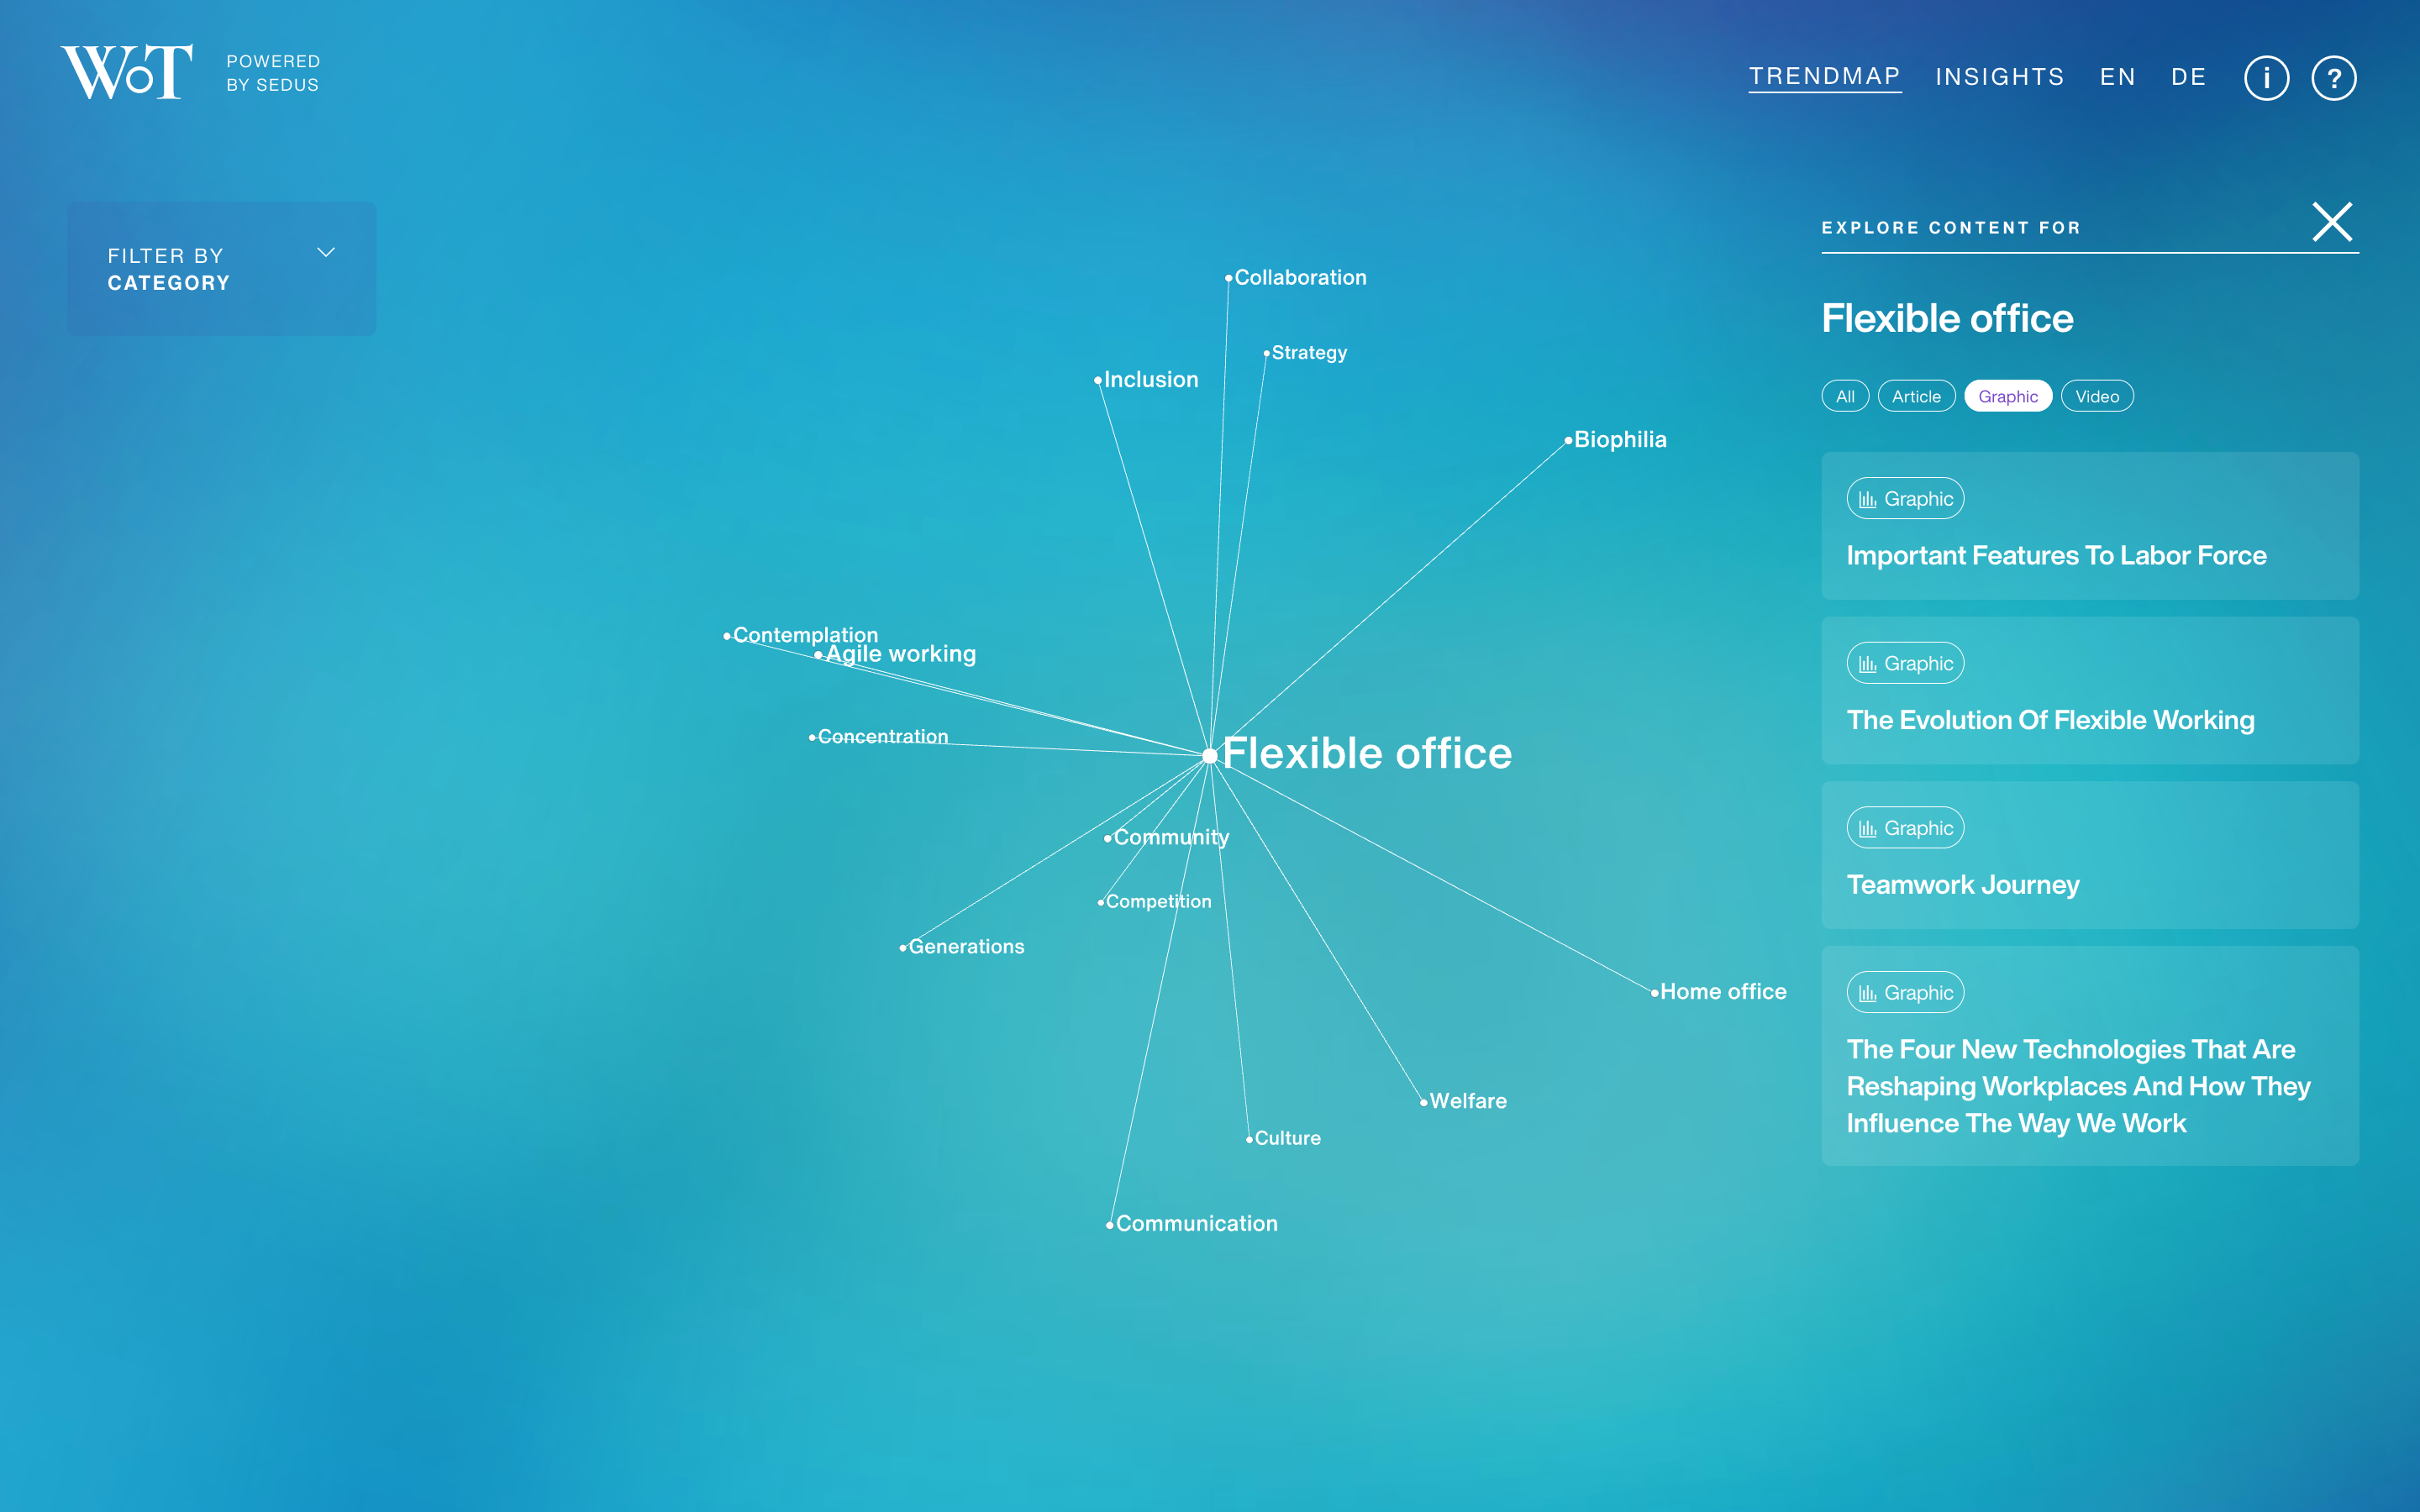 The Workscape of Tomorrow: Network Graph, Flexible Office Content